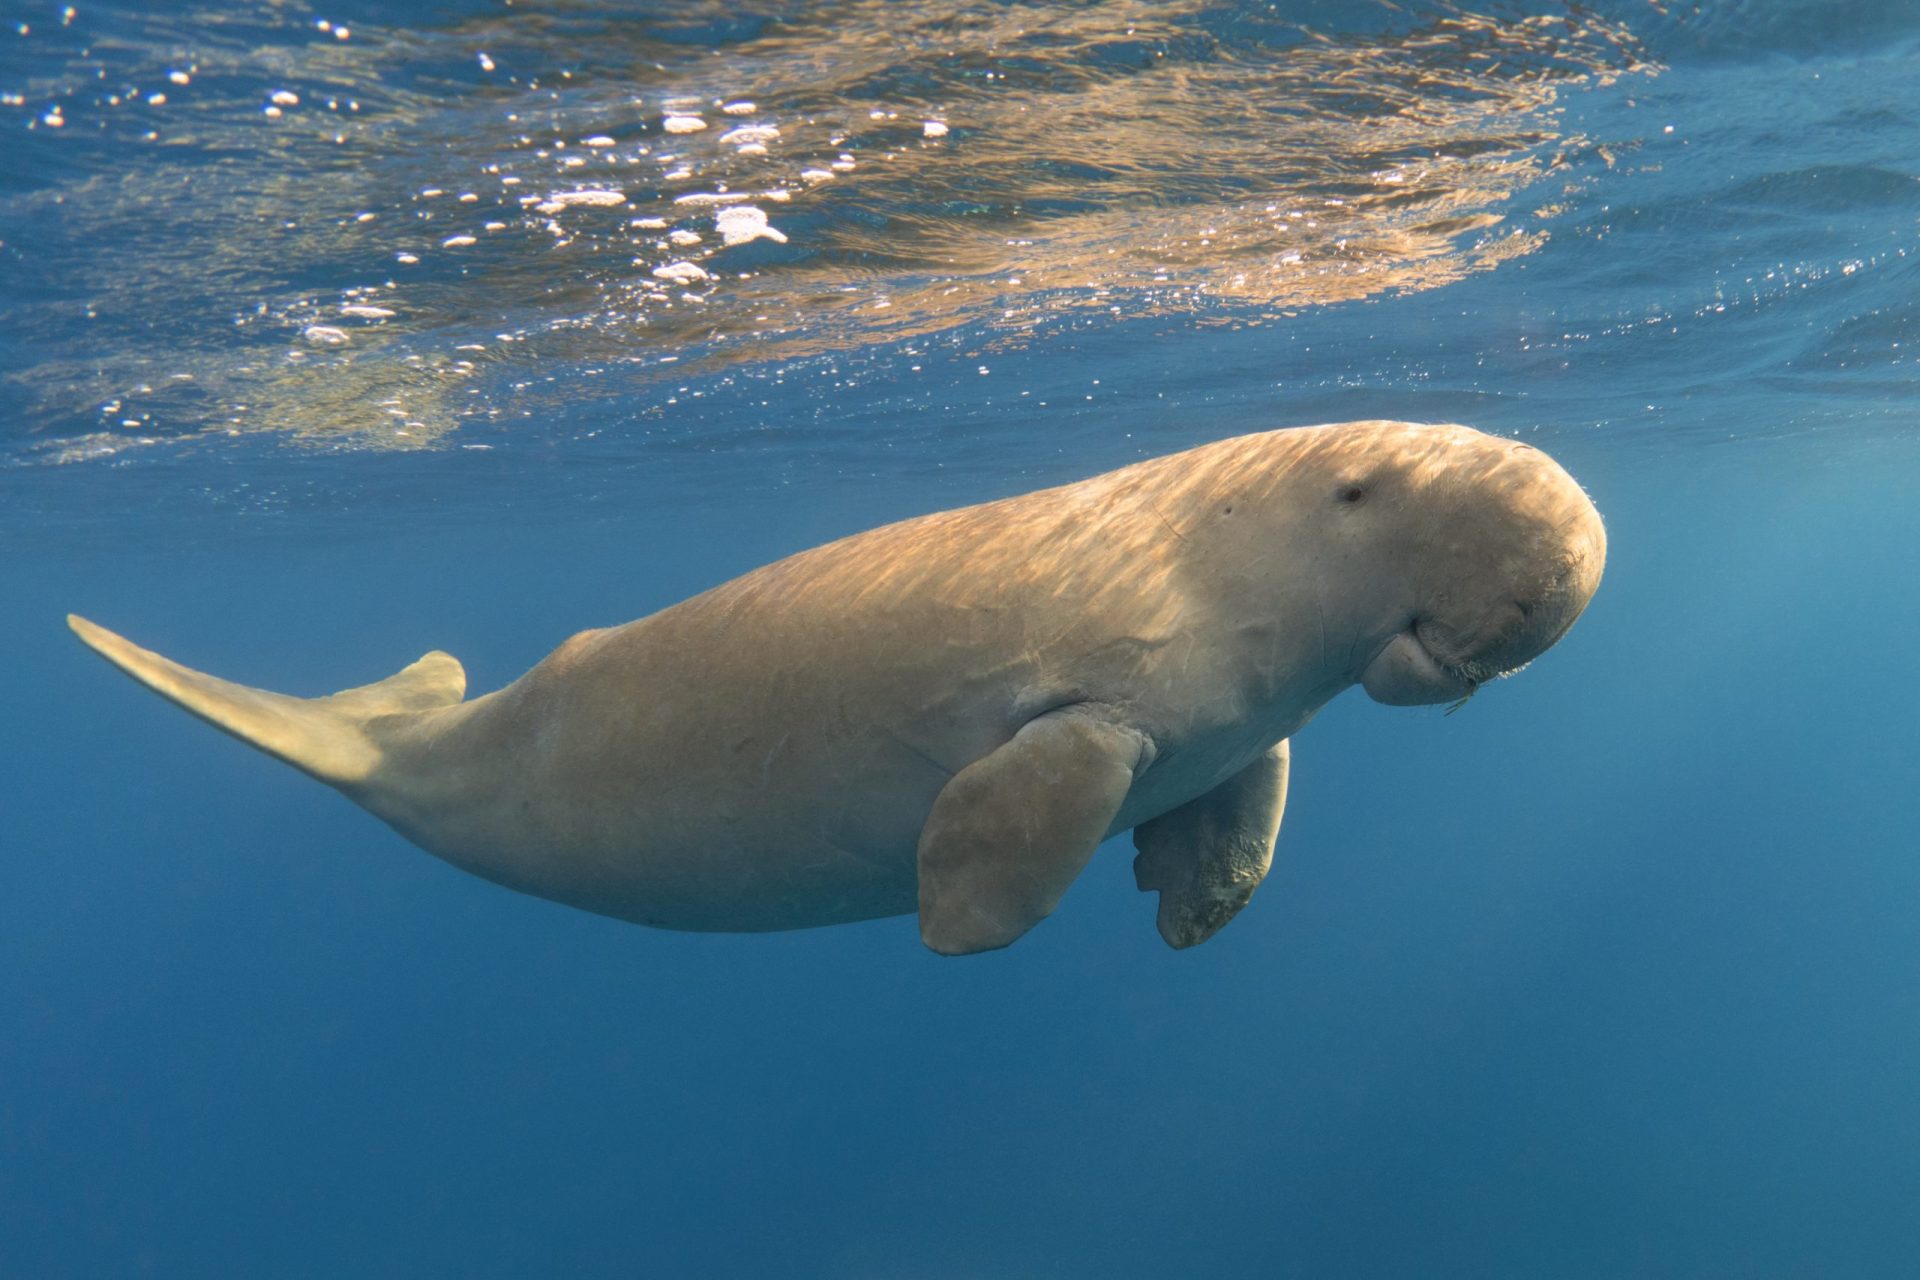 A serene dugong swims under the water's surface, highlighted by the shimmering sunlight above.